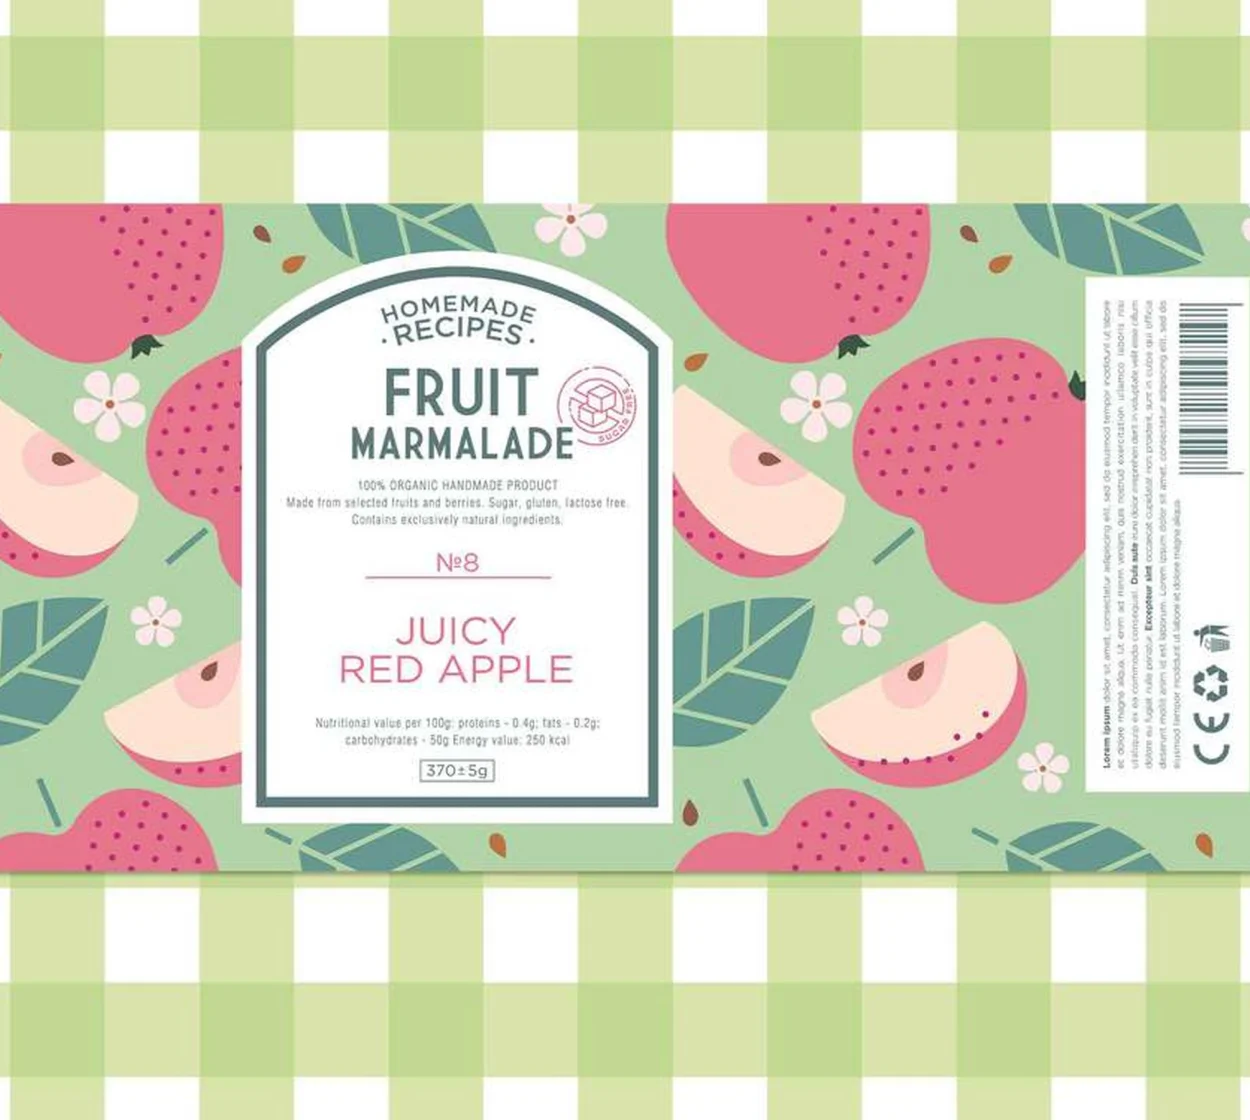 How to Make a Product Label That Sells